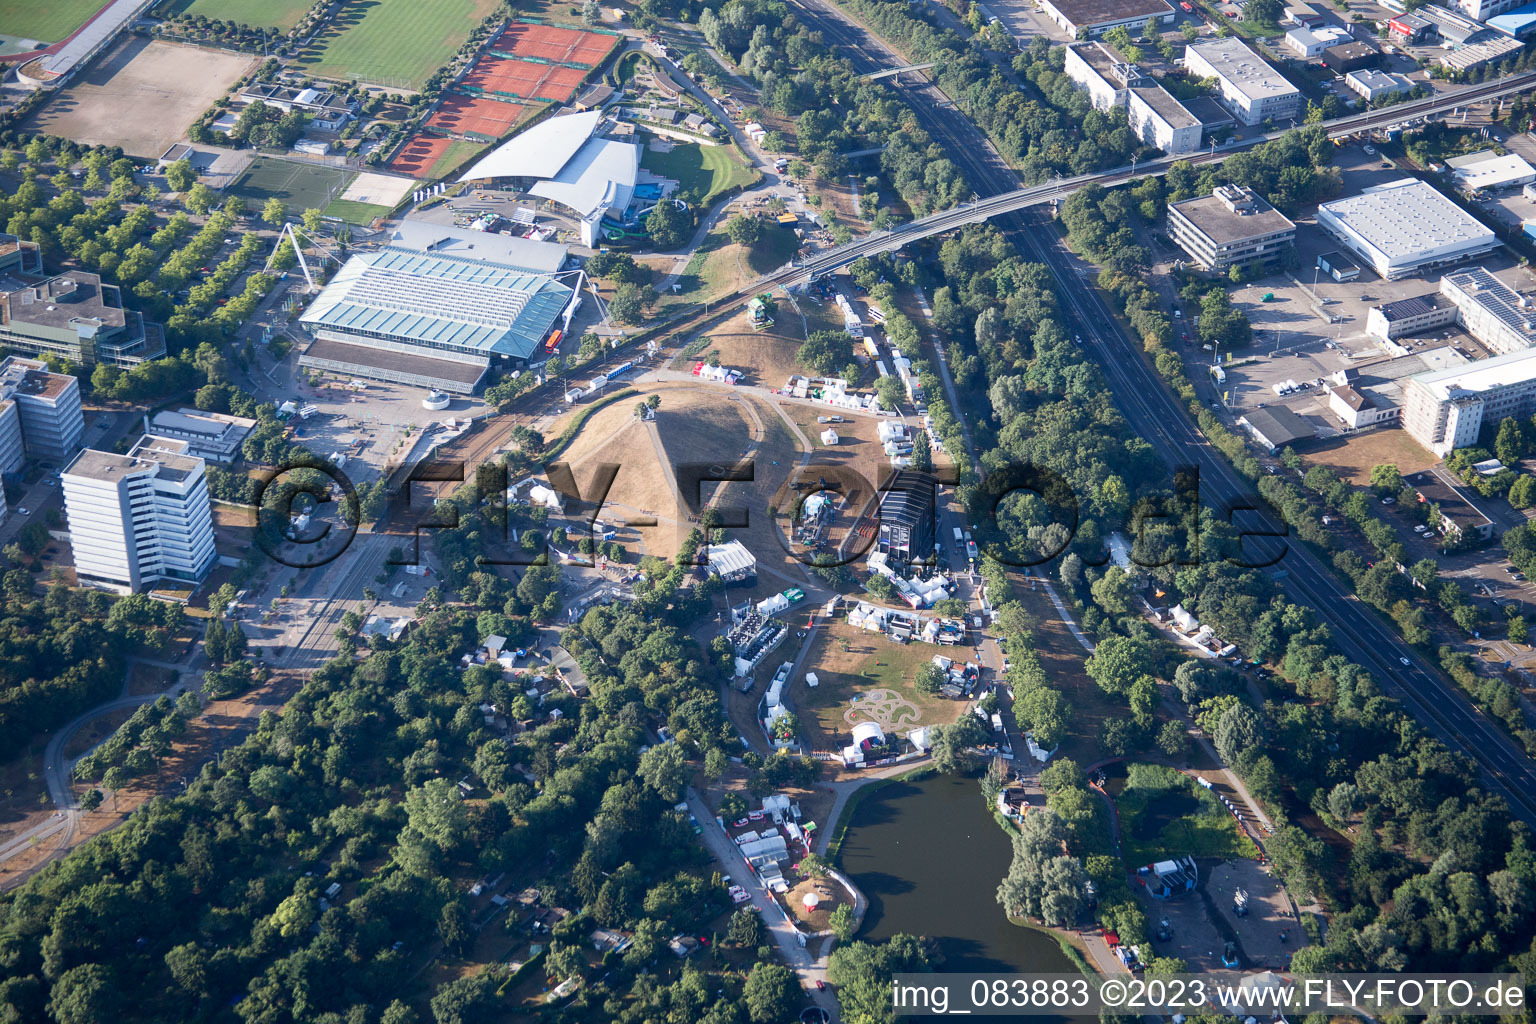 KA, Günther Klotz Facility, The Festival in the district Südweststadt in Karlsruhe in the state Baden-Wuerttemberg, Germany from above